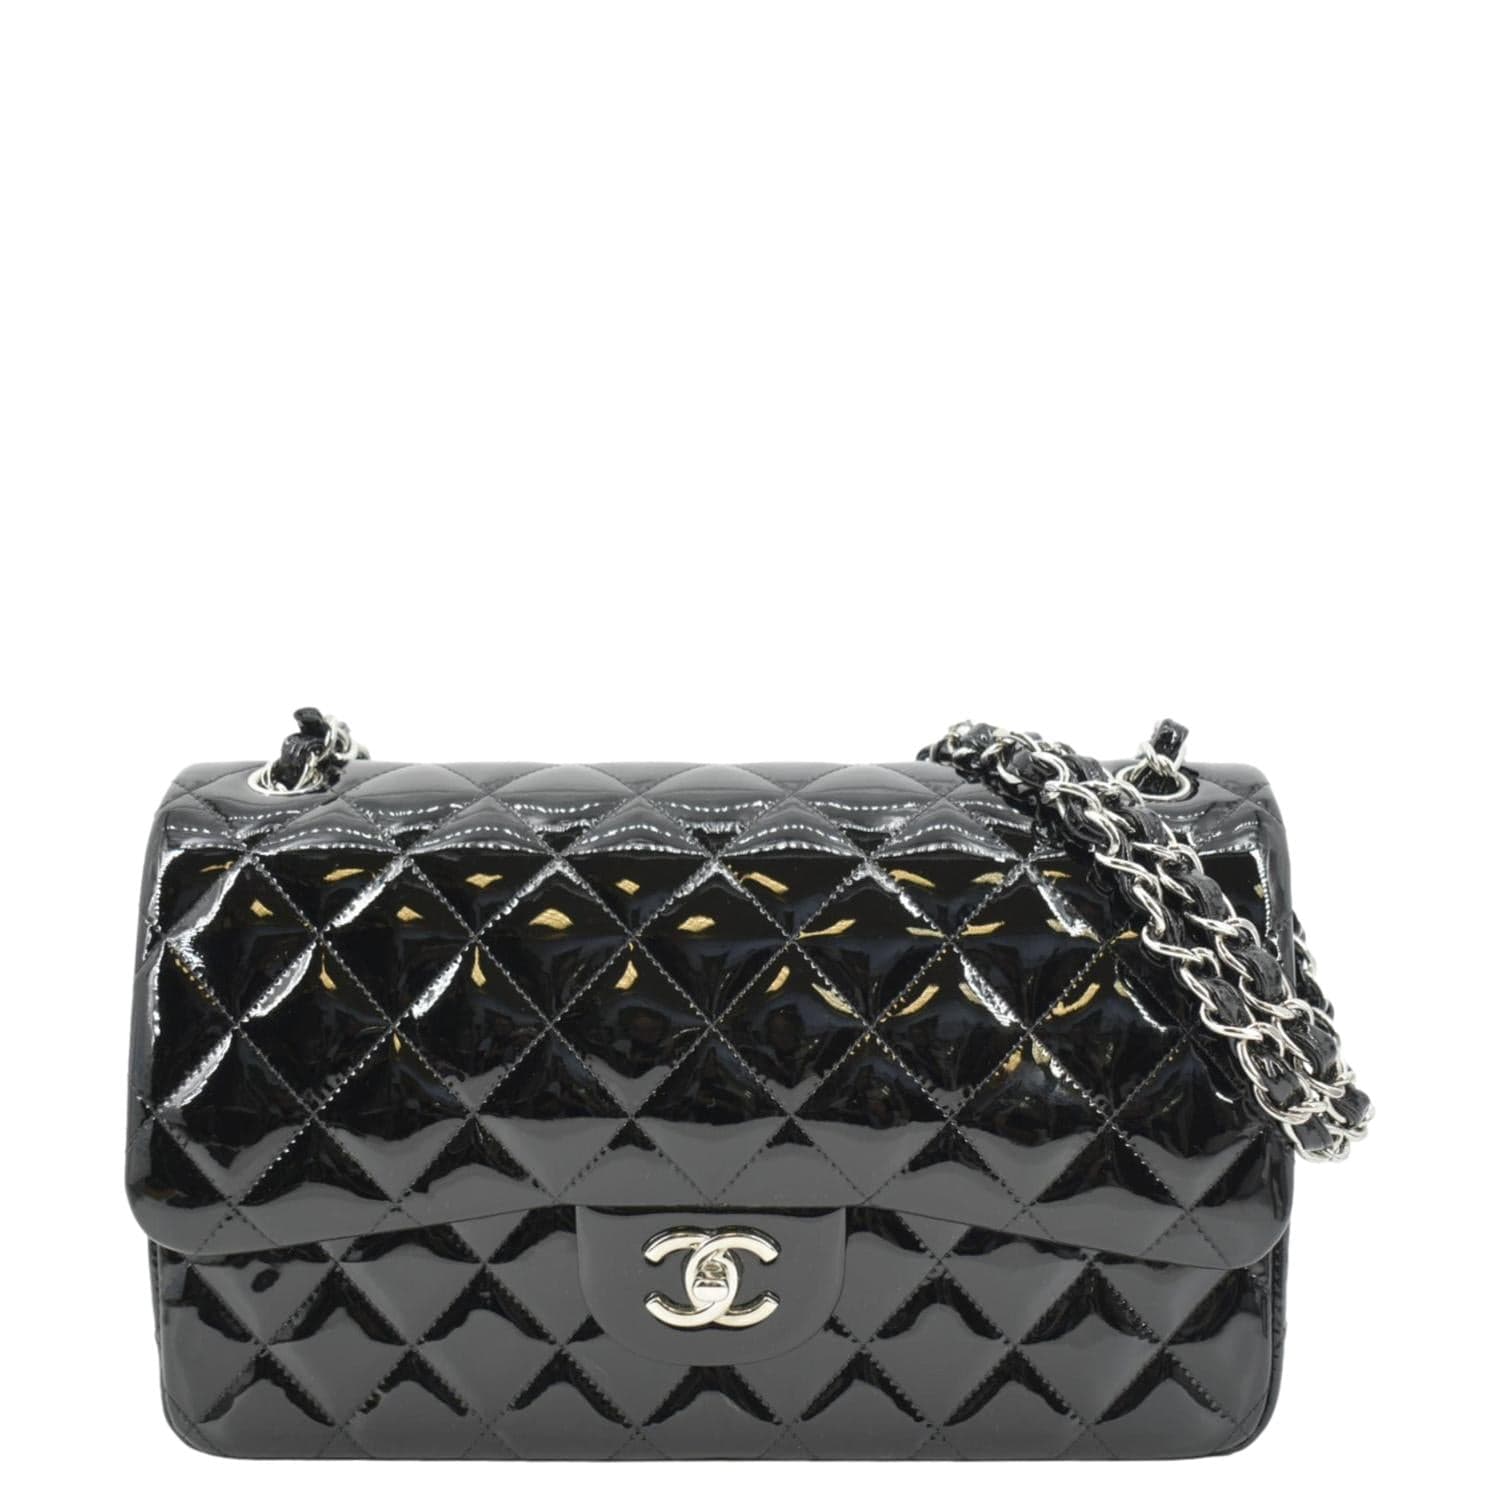 Timeless/Classique patent leather crossbody bag